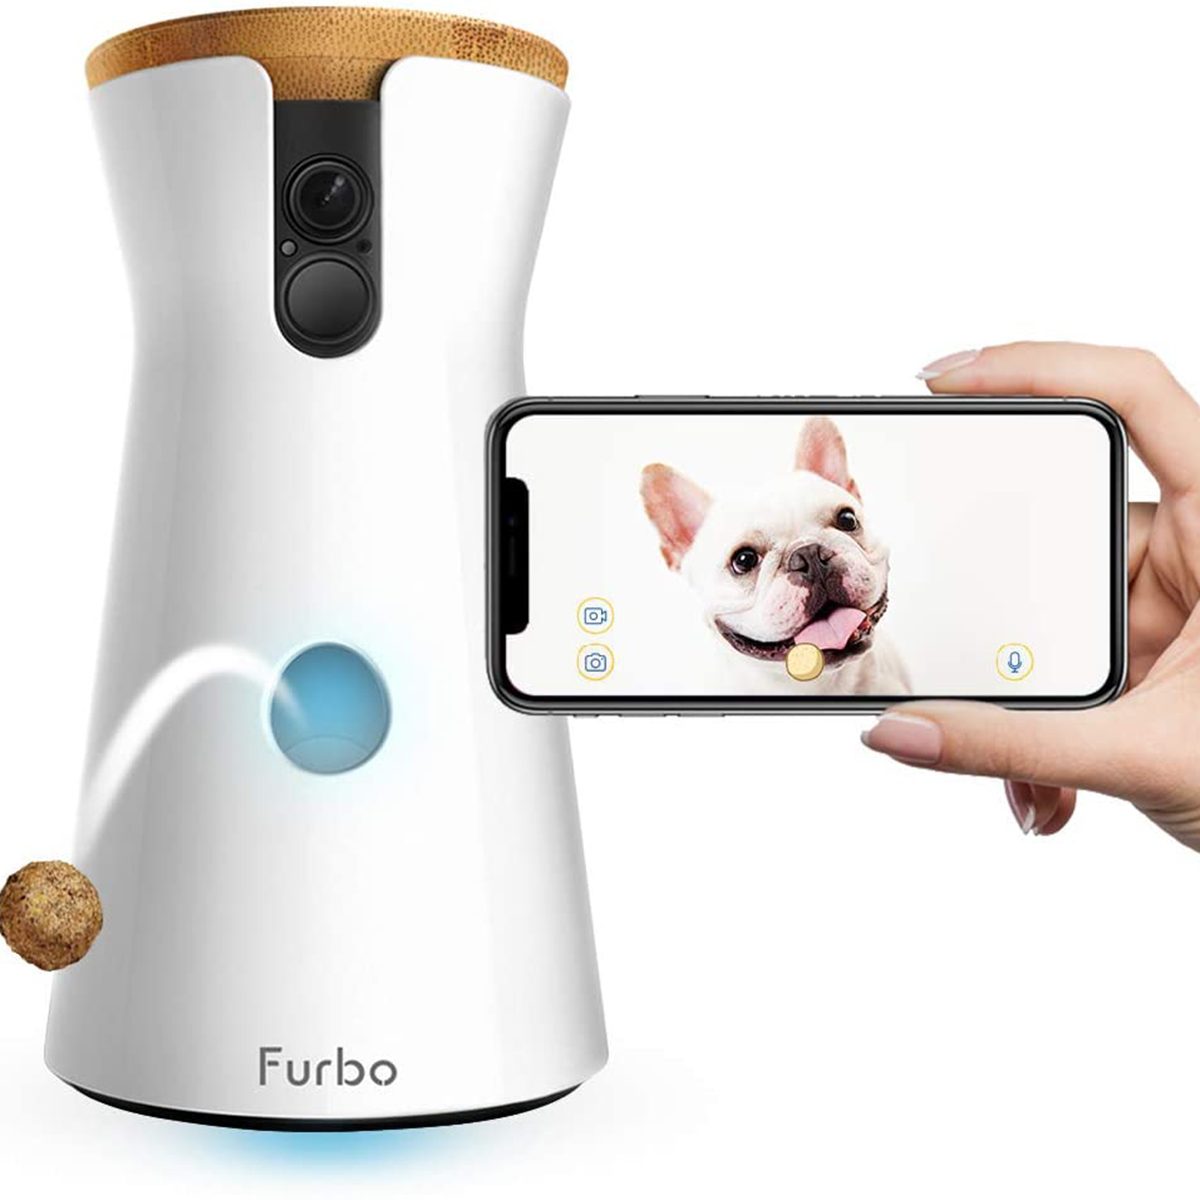 30 Cool High Tech Gadgets To Give Your Home A Futuristic Look